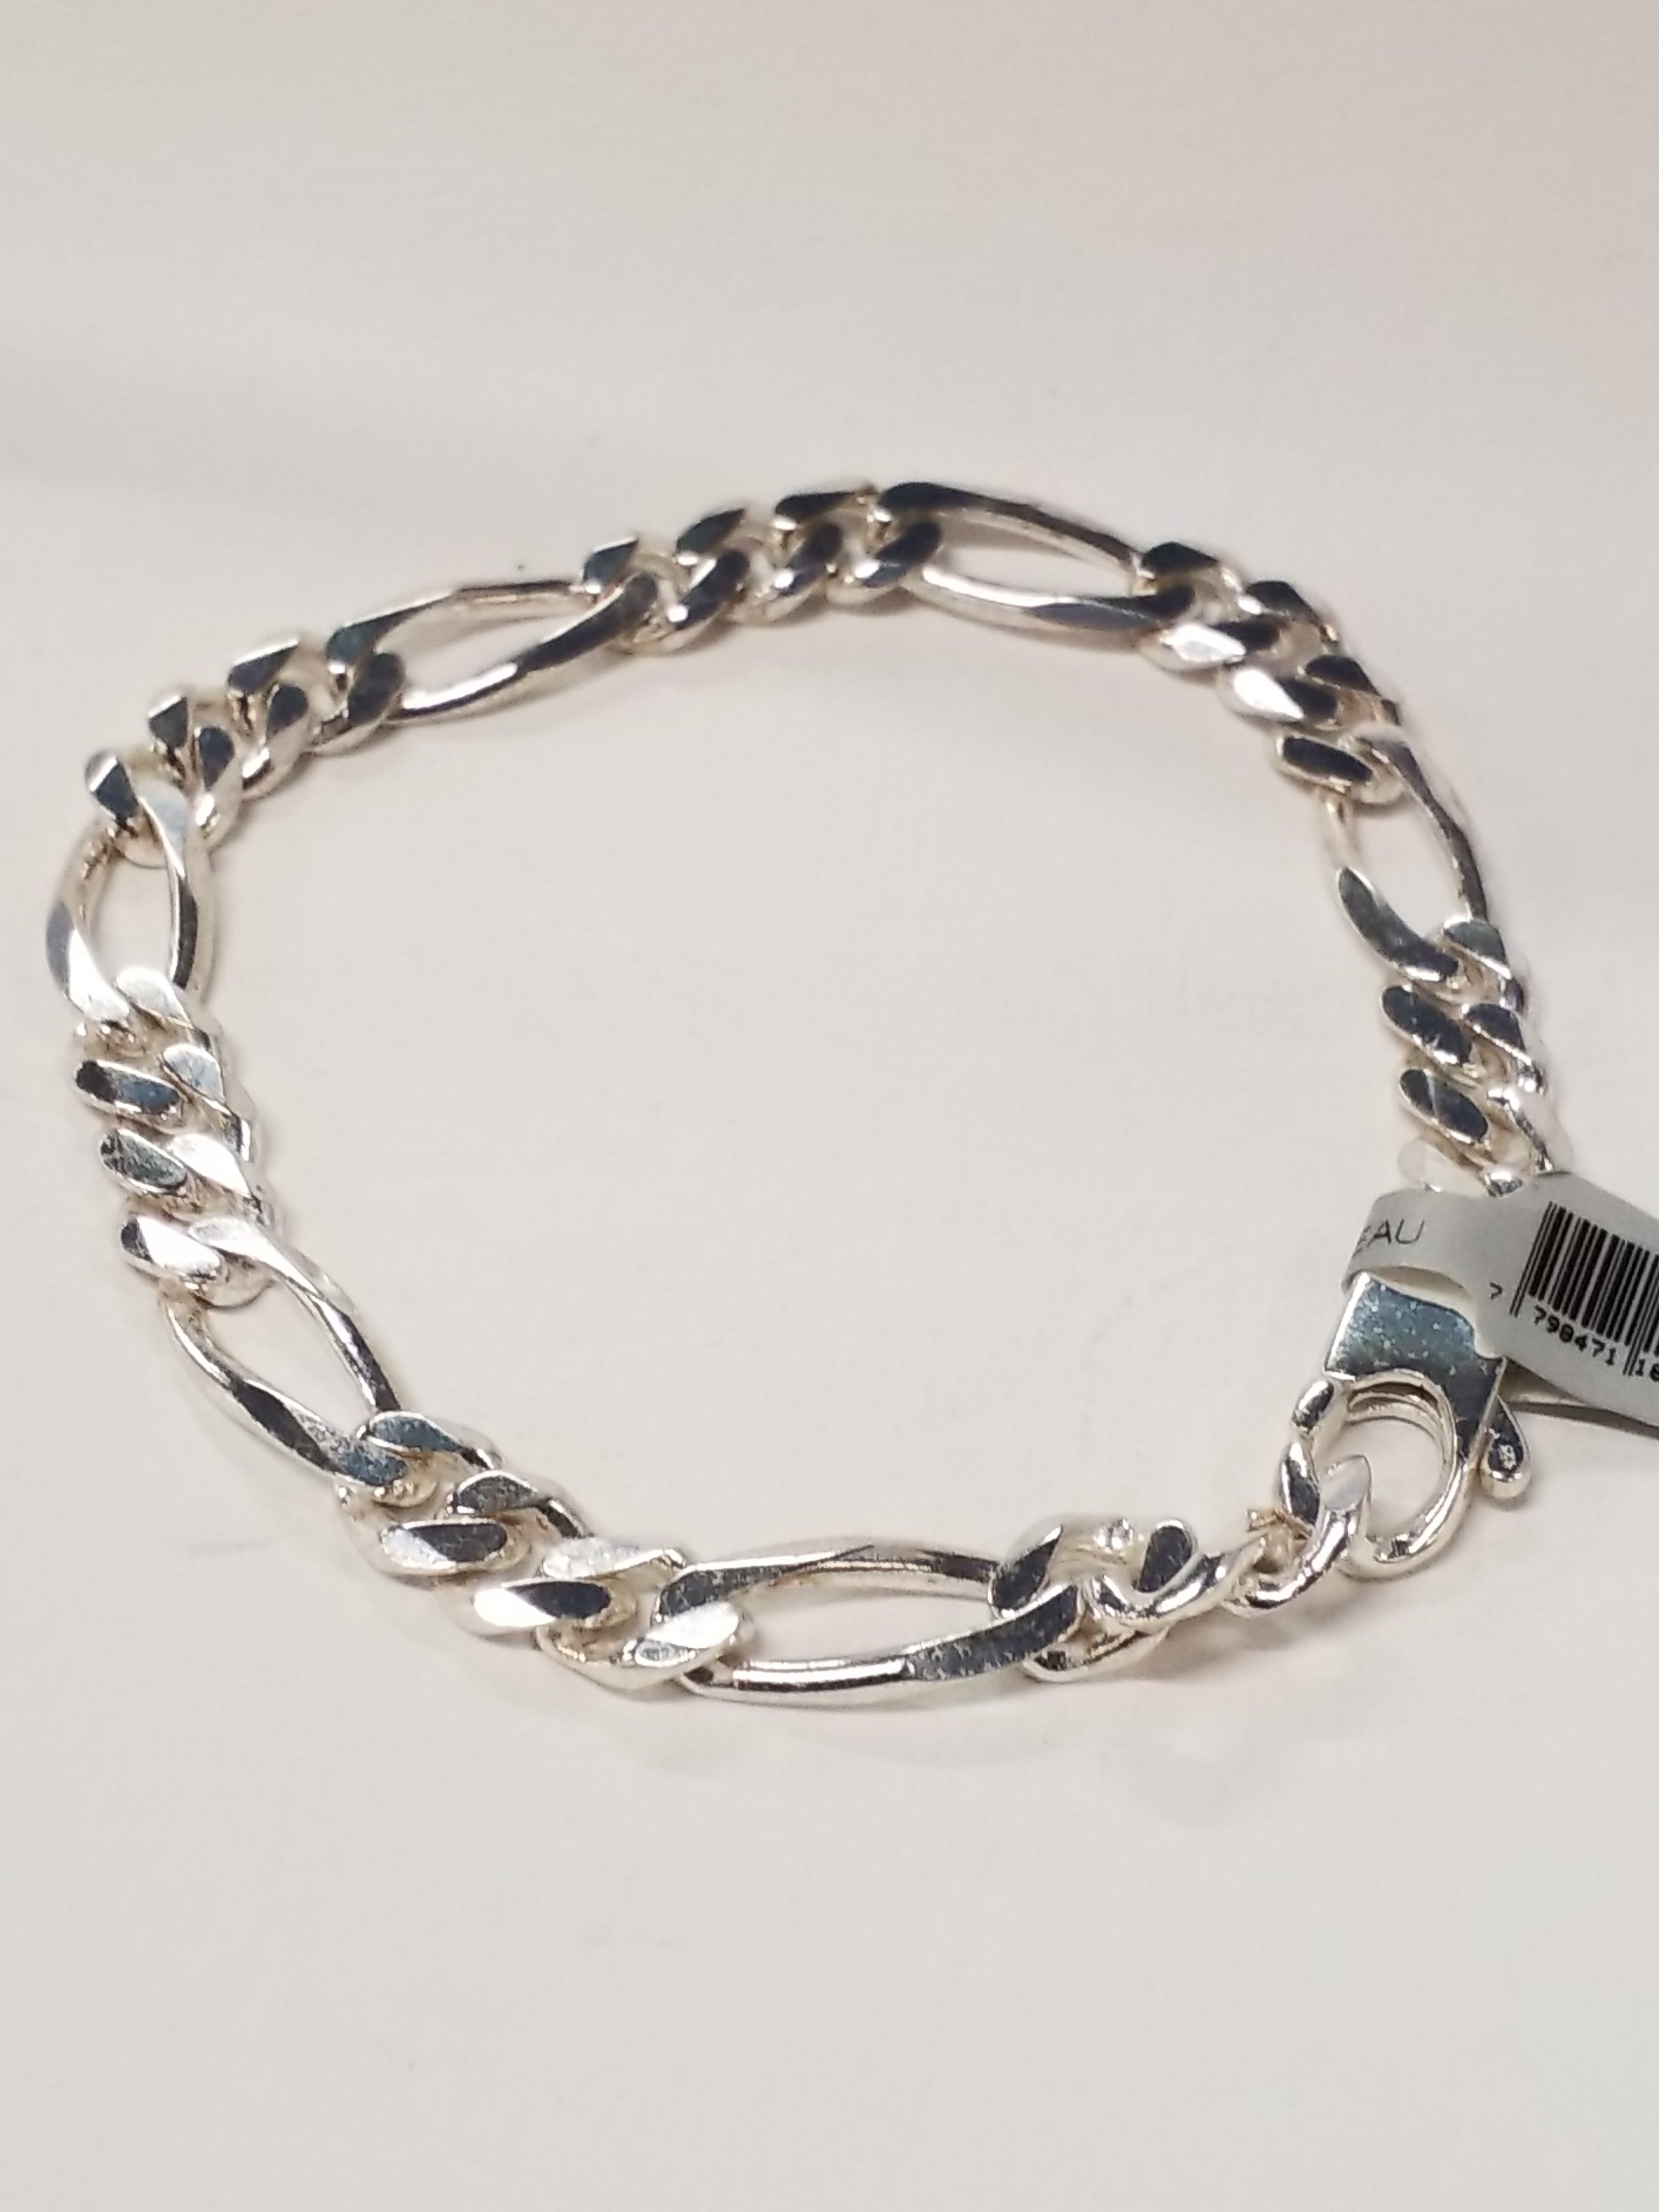 S/SBracelet Figaro Style - in-stock options - Mens and Womens - Sterling Silver